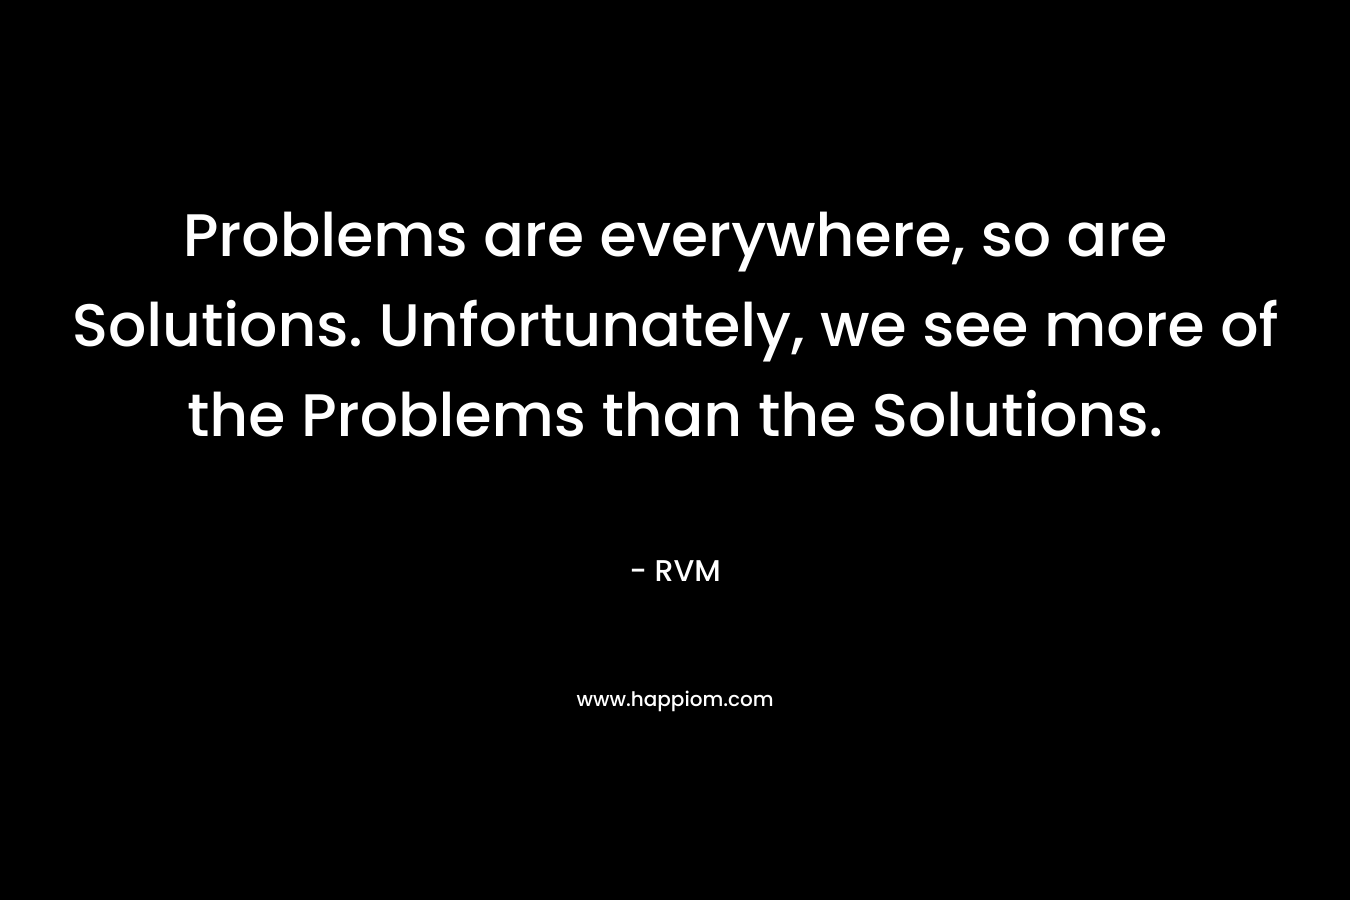 Problems are everywhere, so are Solutions. Unfortunately, we see more of the Problems than the Solutions.